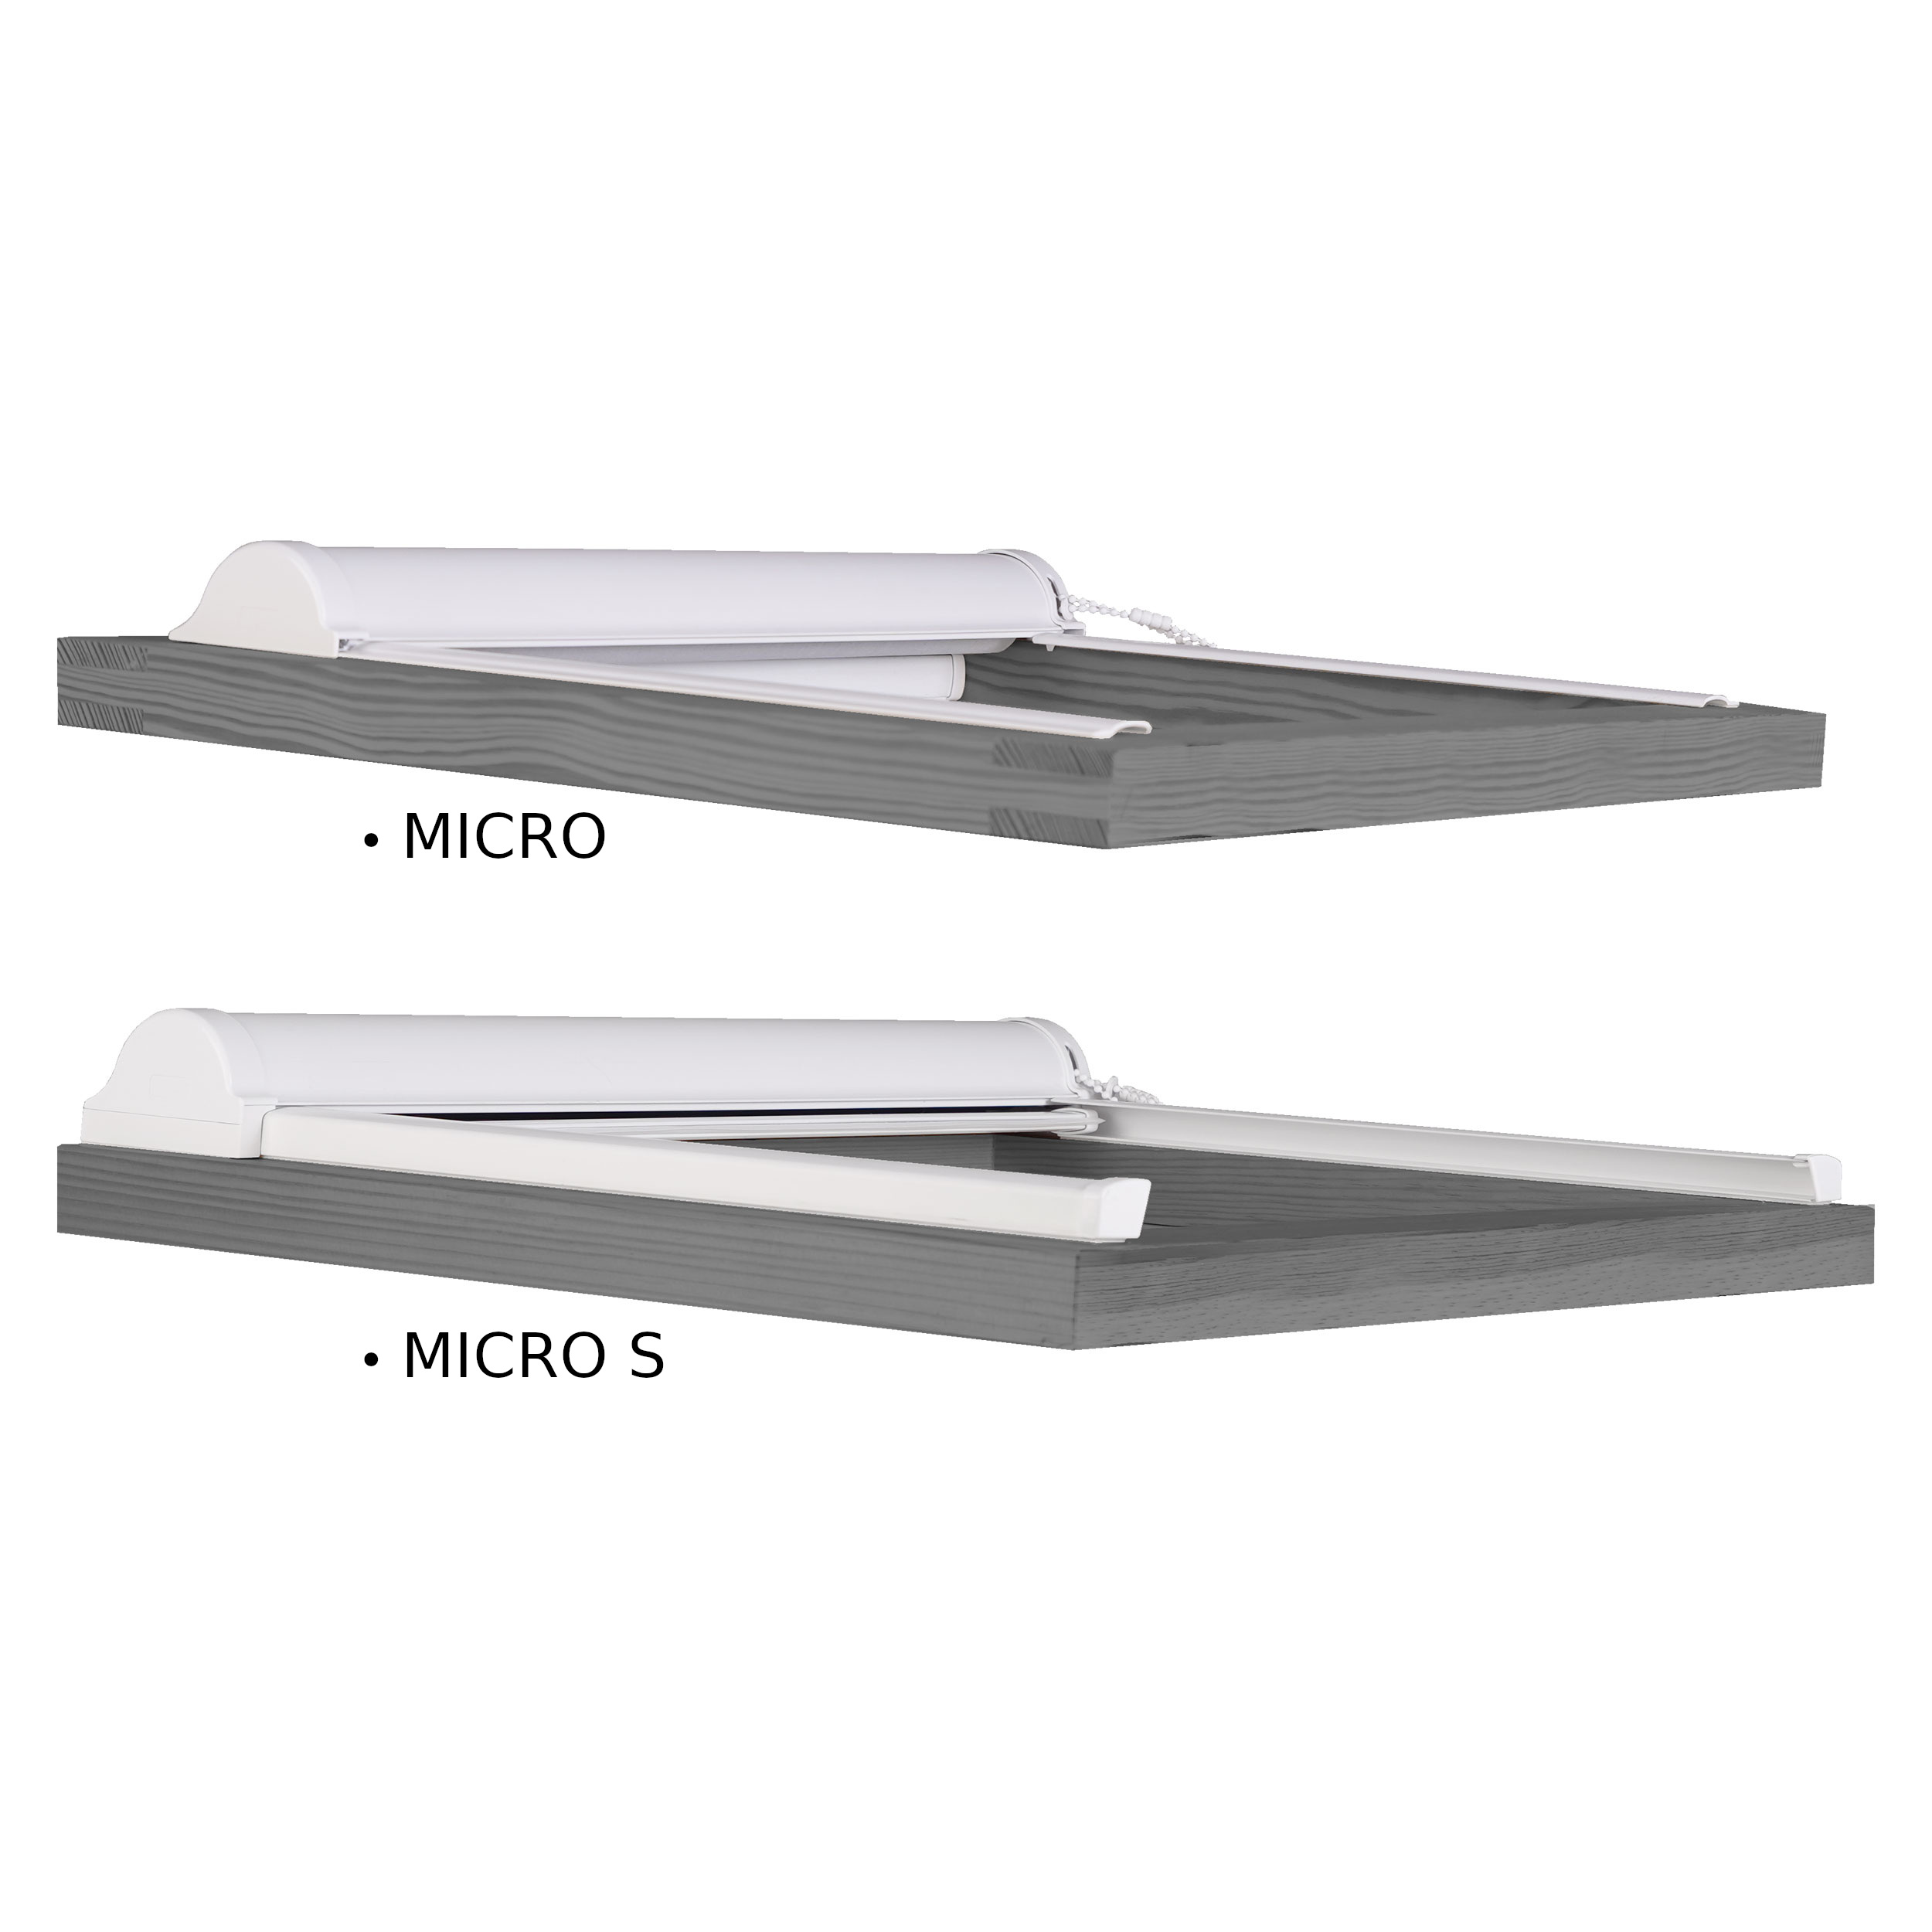 Differences MICRO MICRO S Roller Blinds MICRO in a cassette - mounted on the glazing beads